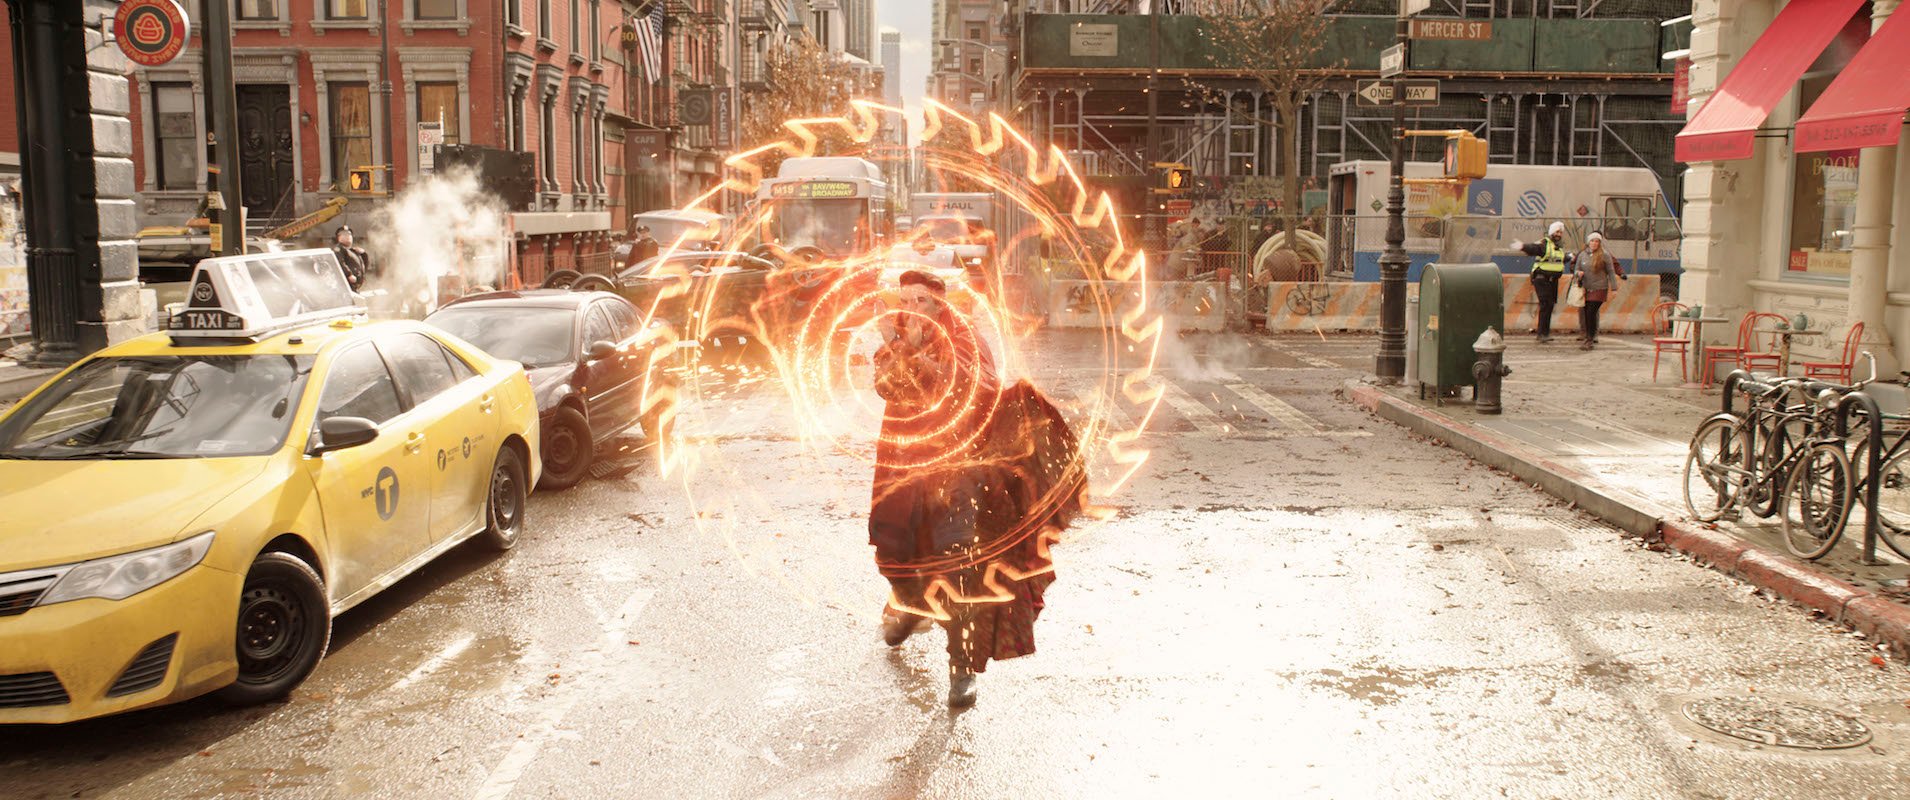 Doctor Strange (Benedict Cumberbatch) conjures a spell in the street before he meets the Illuminati